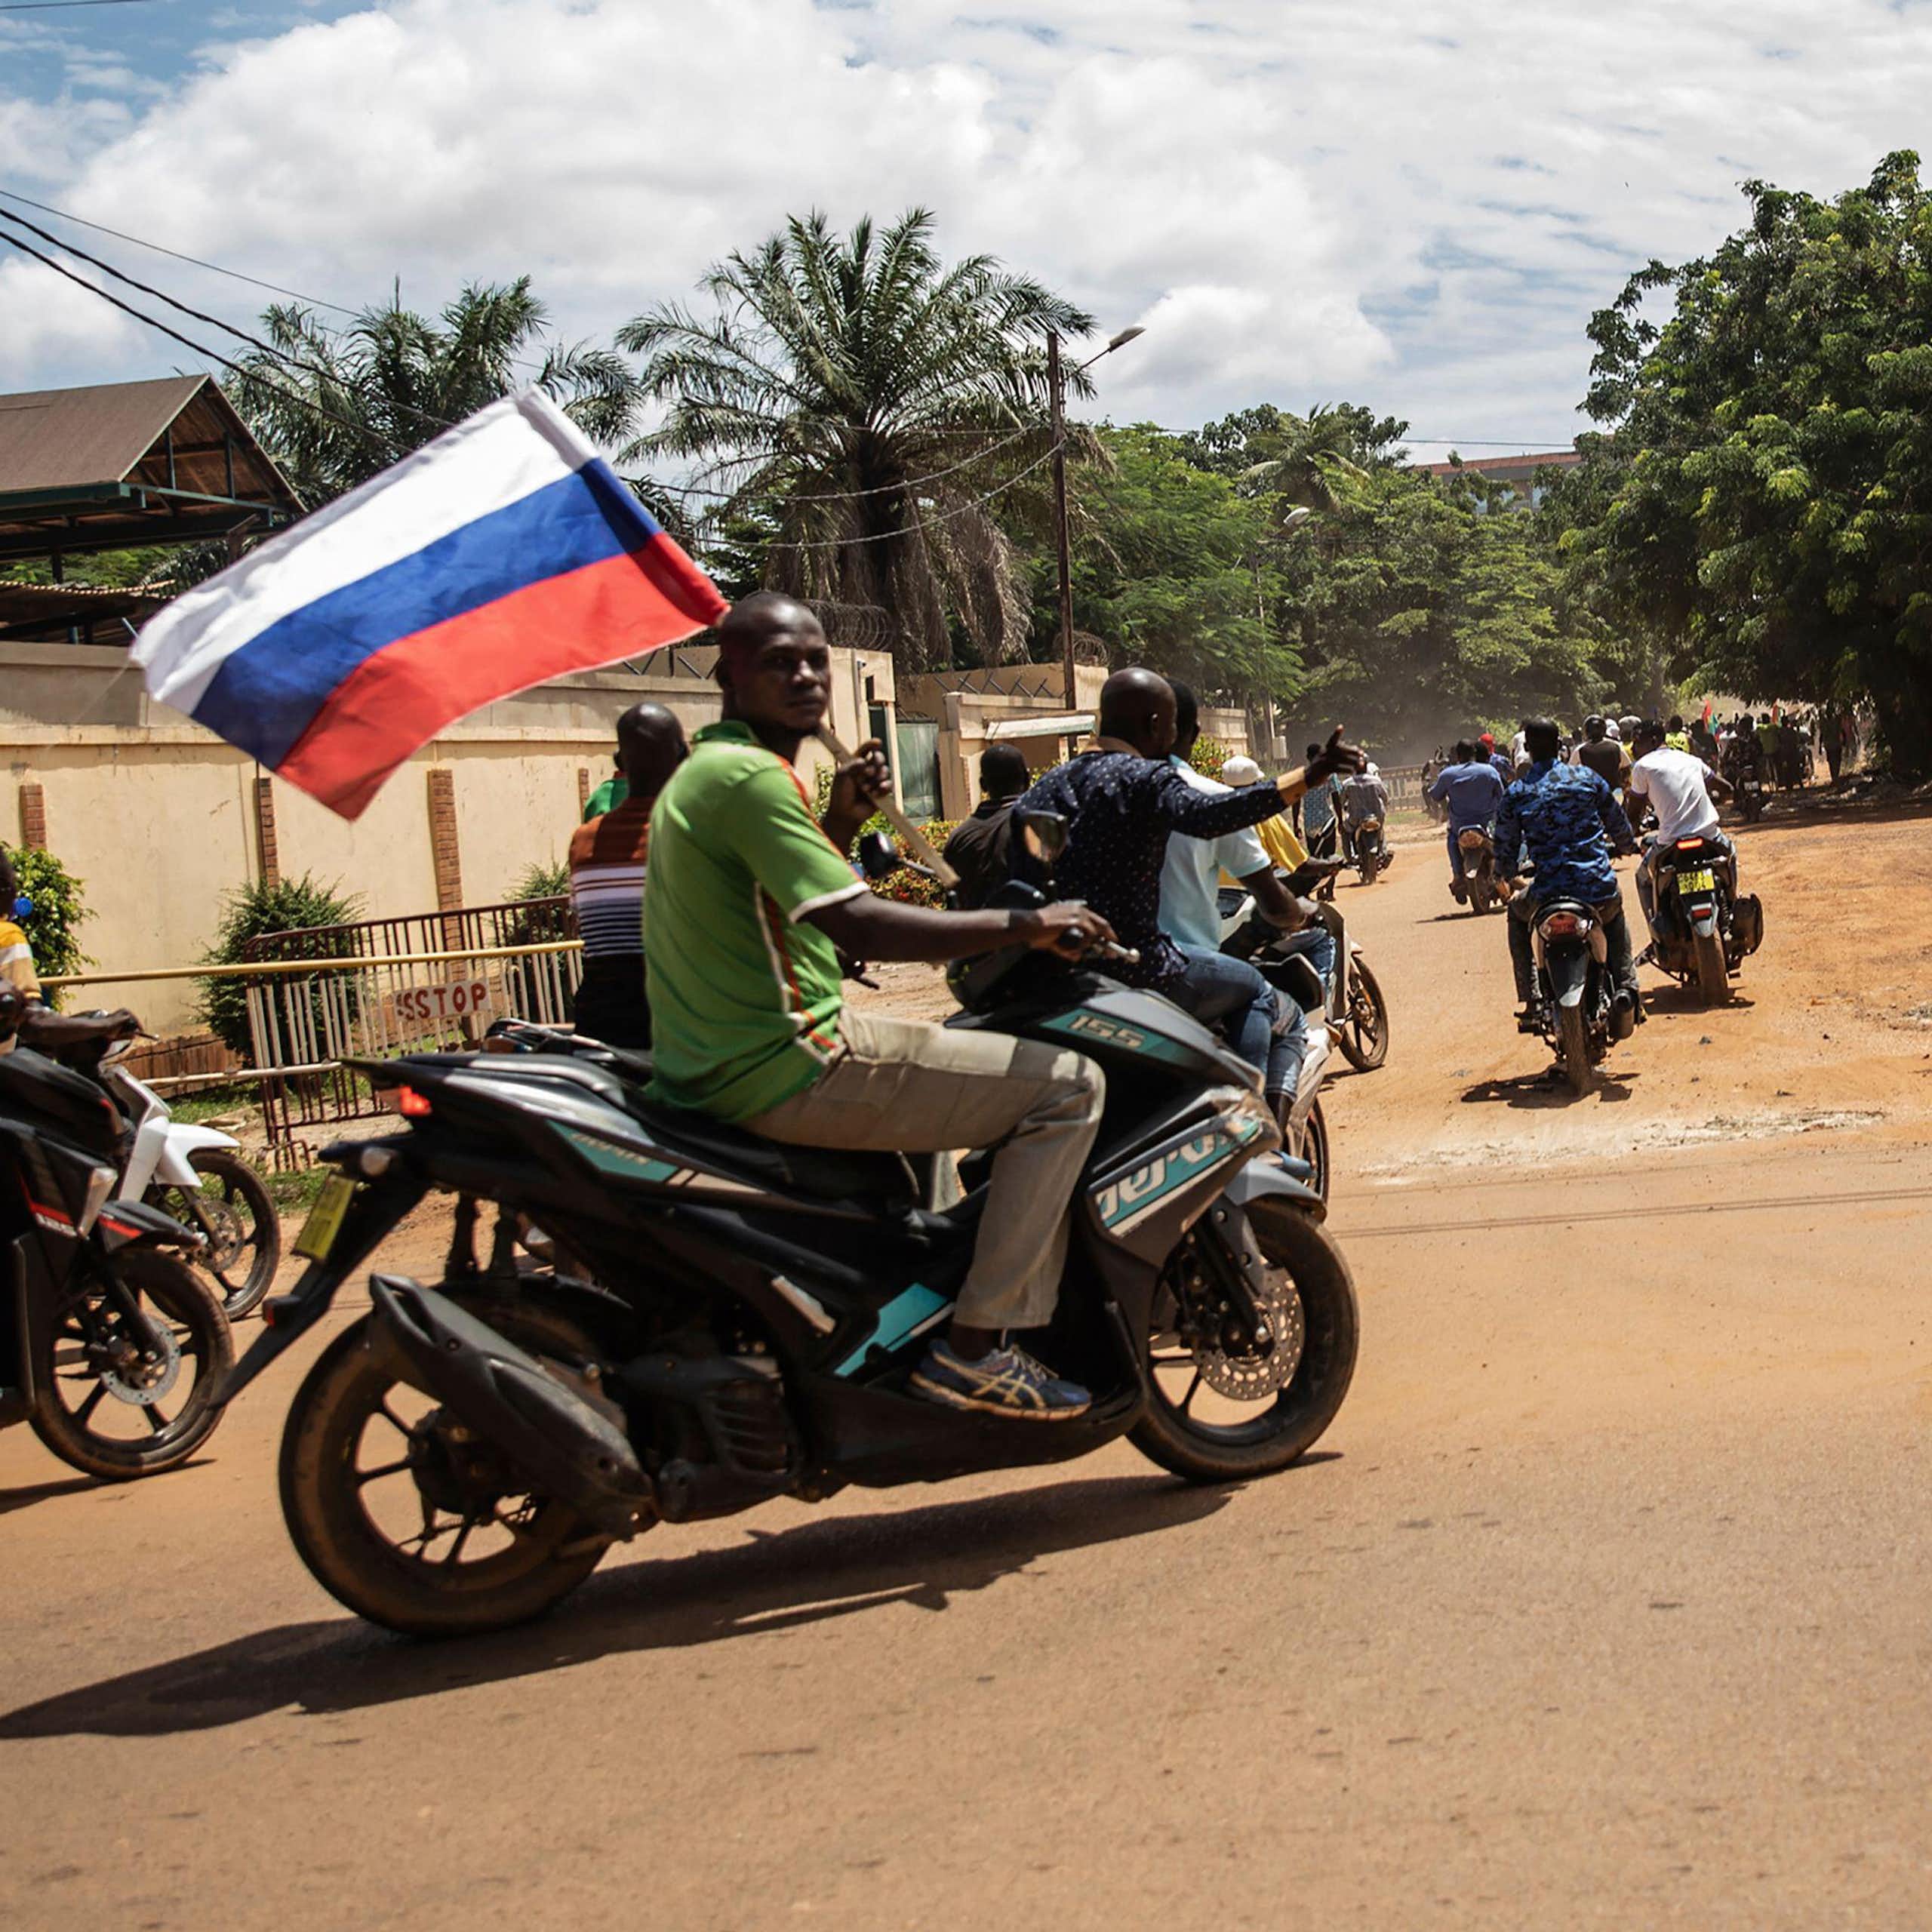 Russia has tightened its hold over the Sahel region – and now it’s looking to Africa’s west coast